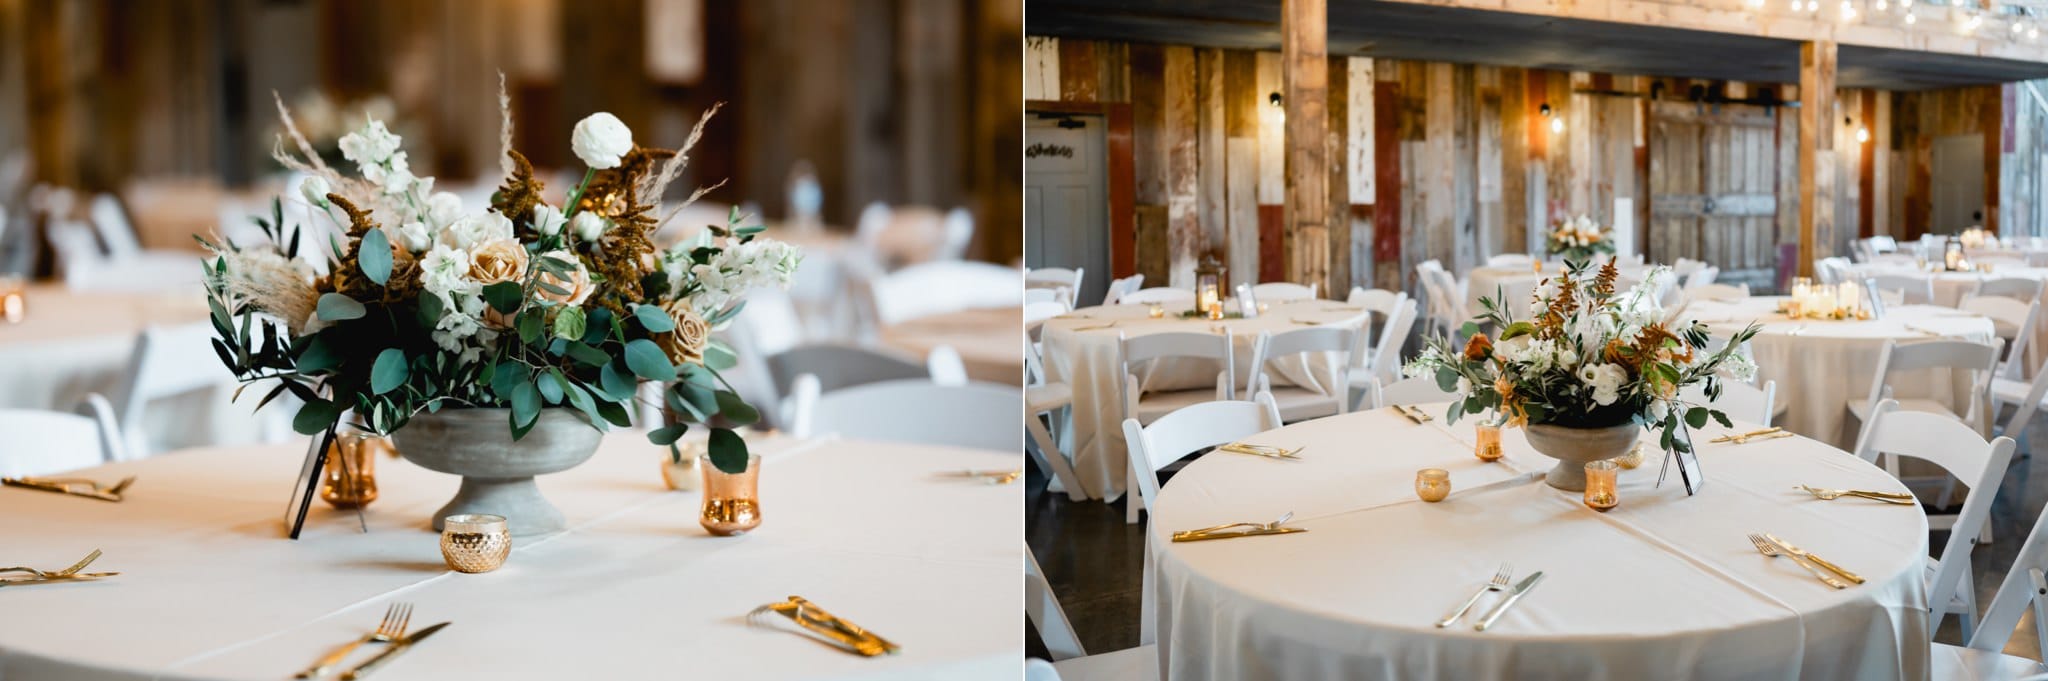 red acre barn wedding reception details